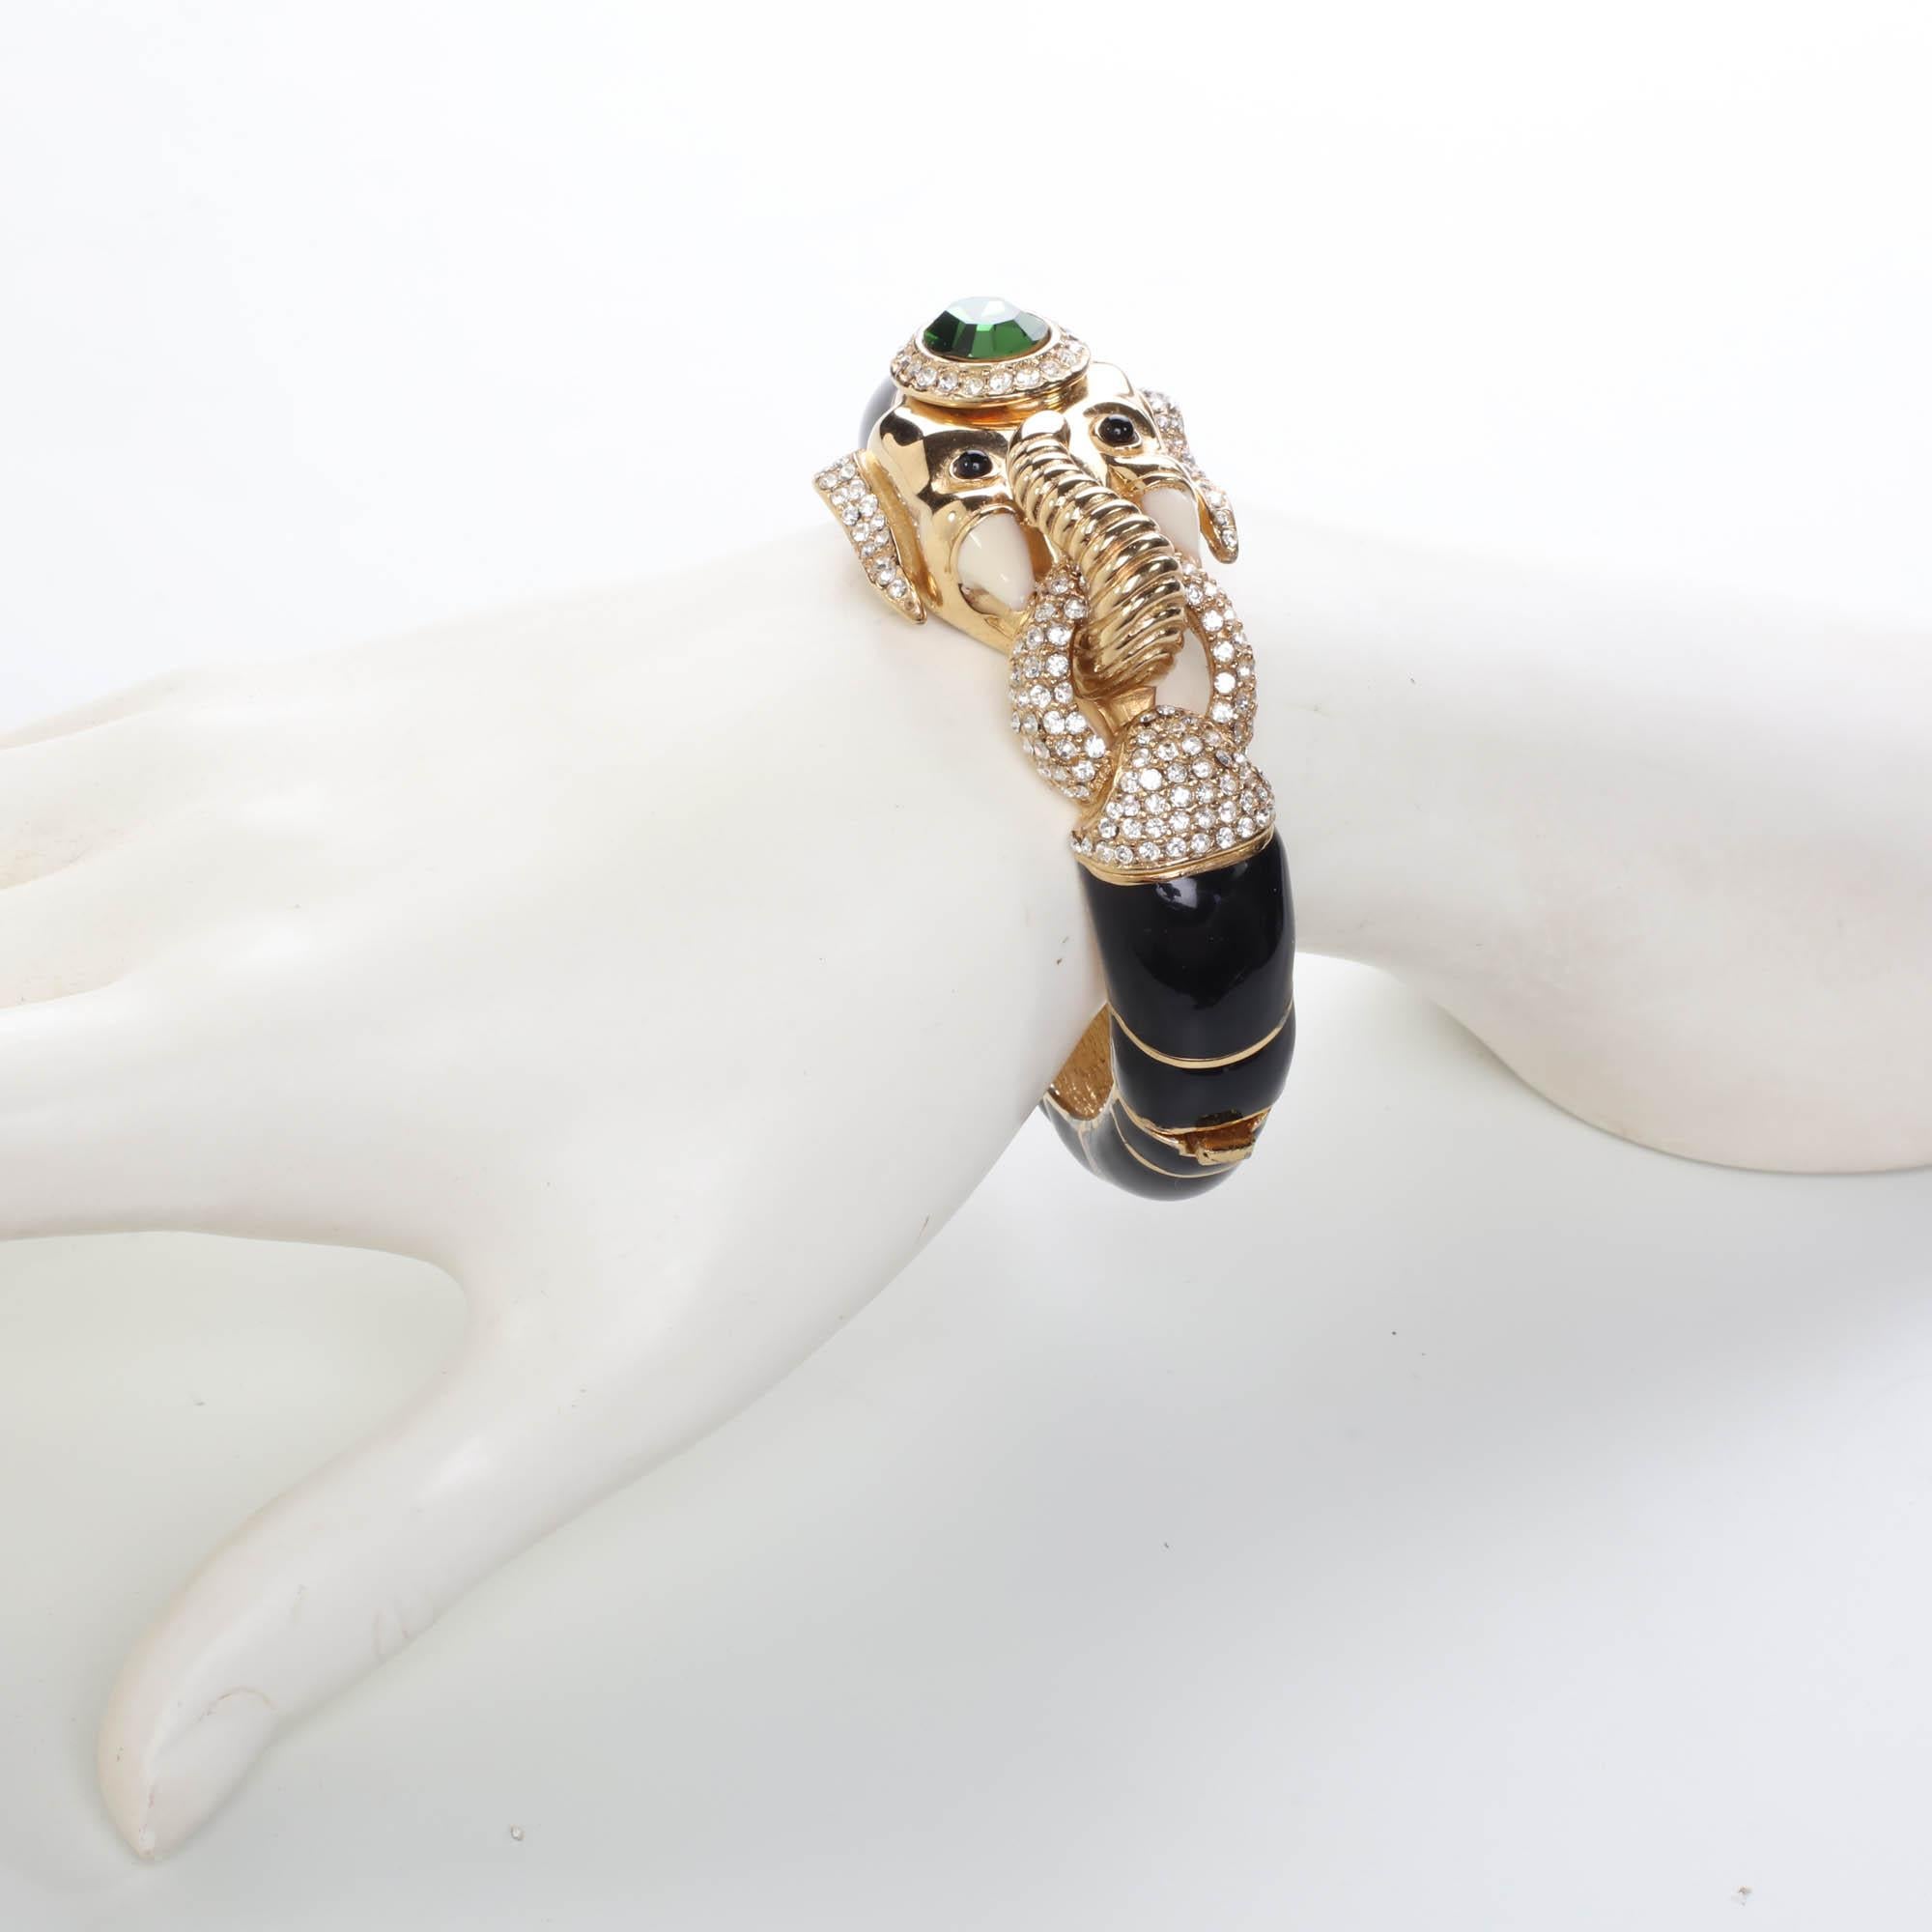 Contemporary CINER Elephant Animal Bracelet in Black with Faceted Green Stone For Sale